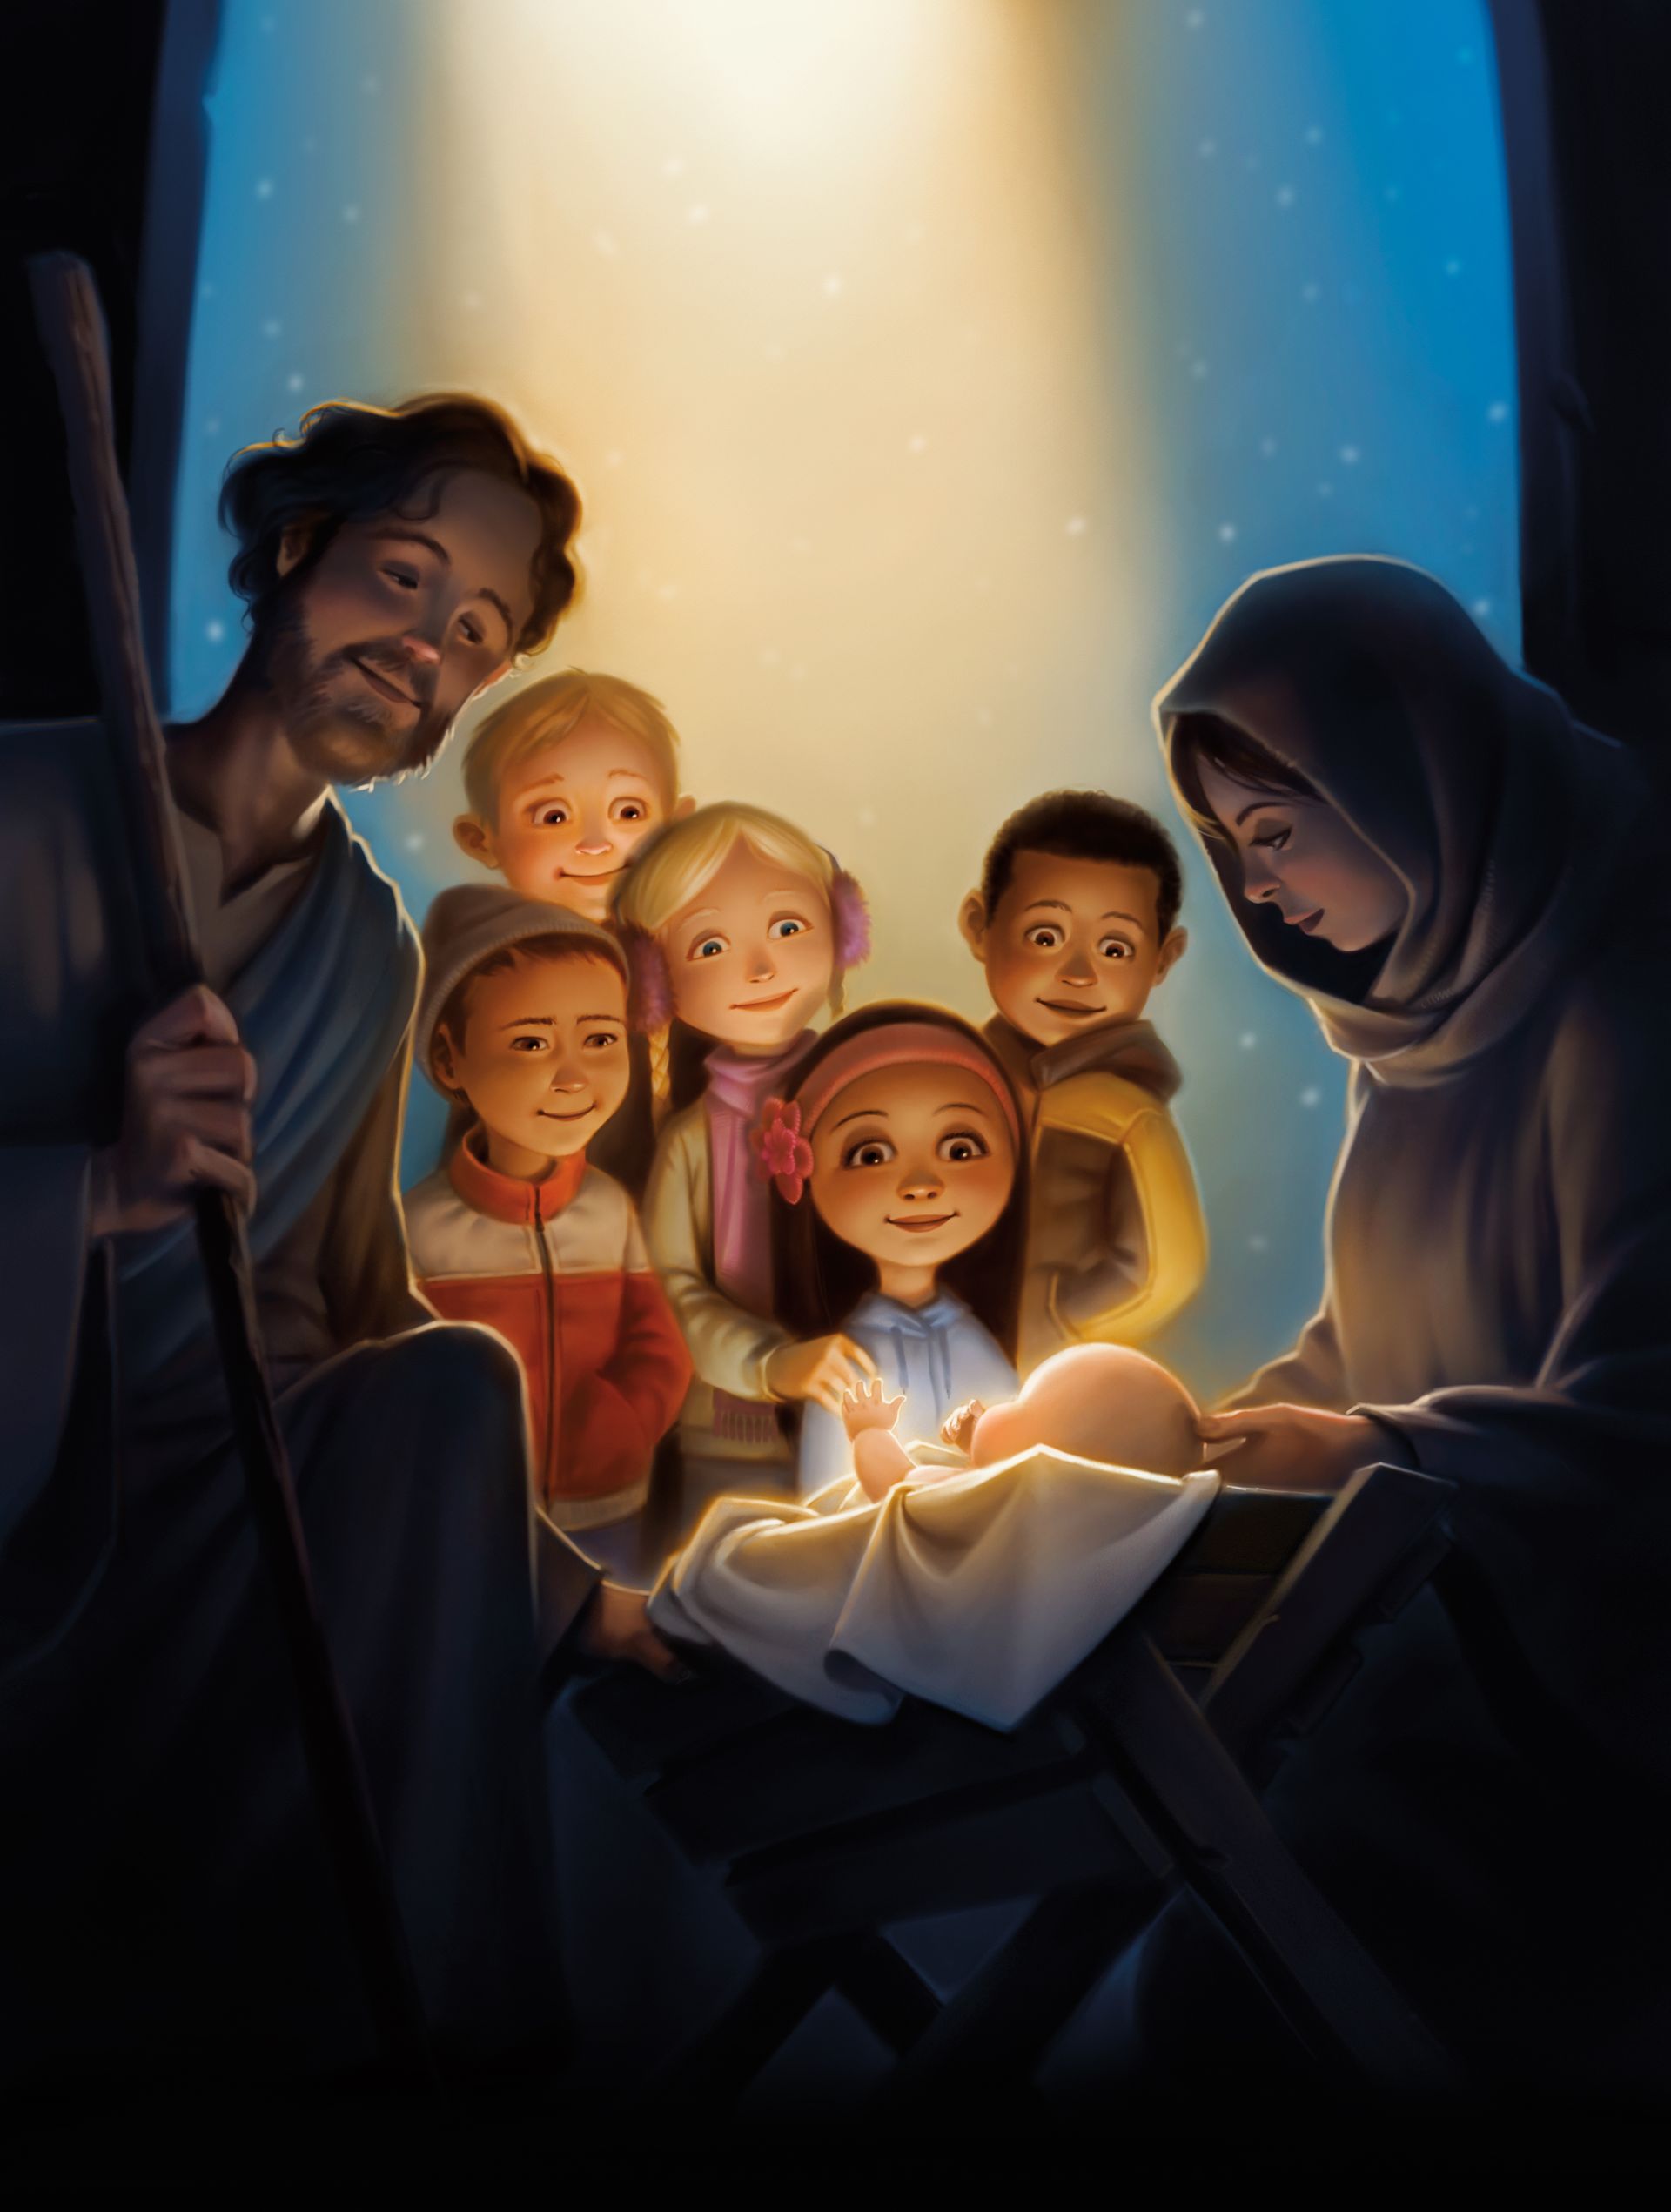 A group of children watch a reenactment of the Nativity scene with Mary, Joseph, and baby Jesus.